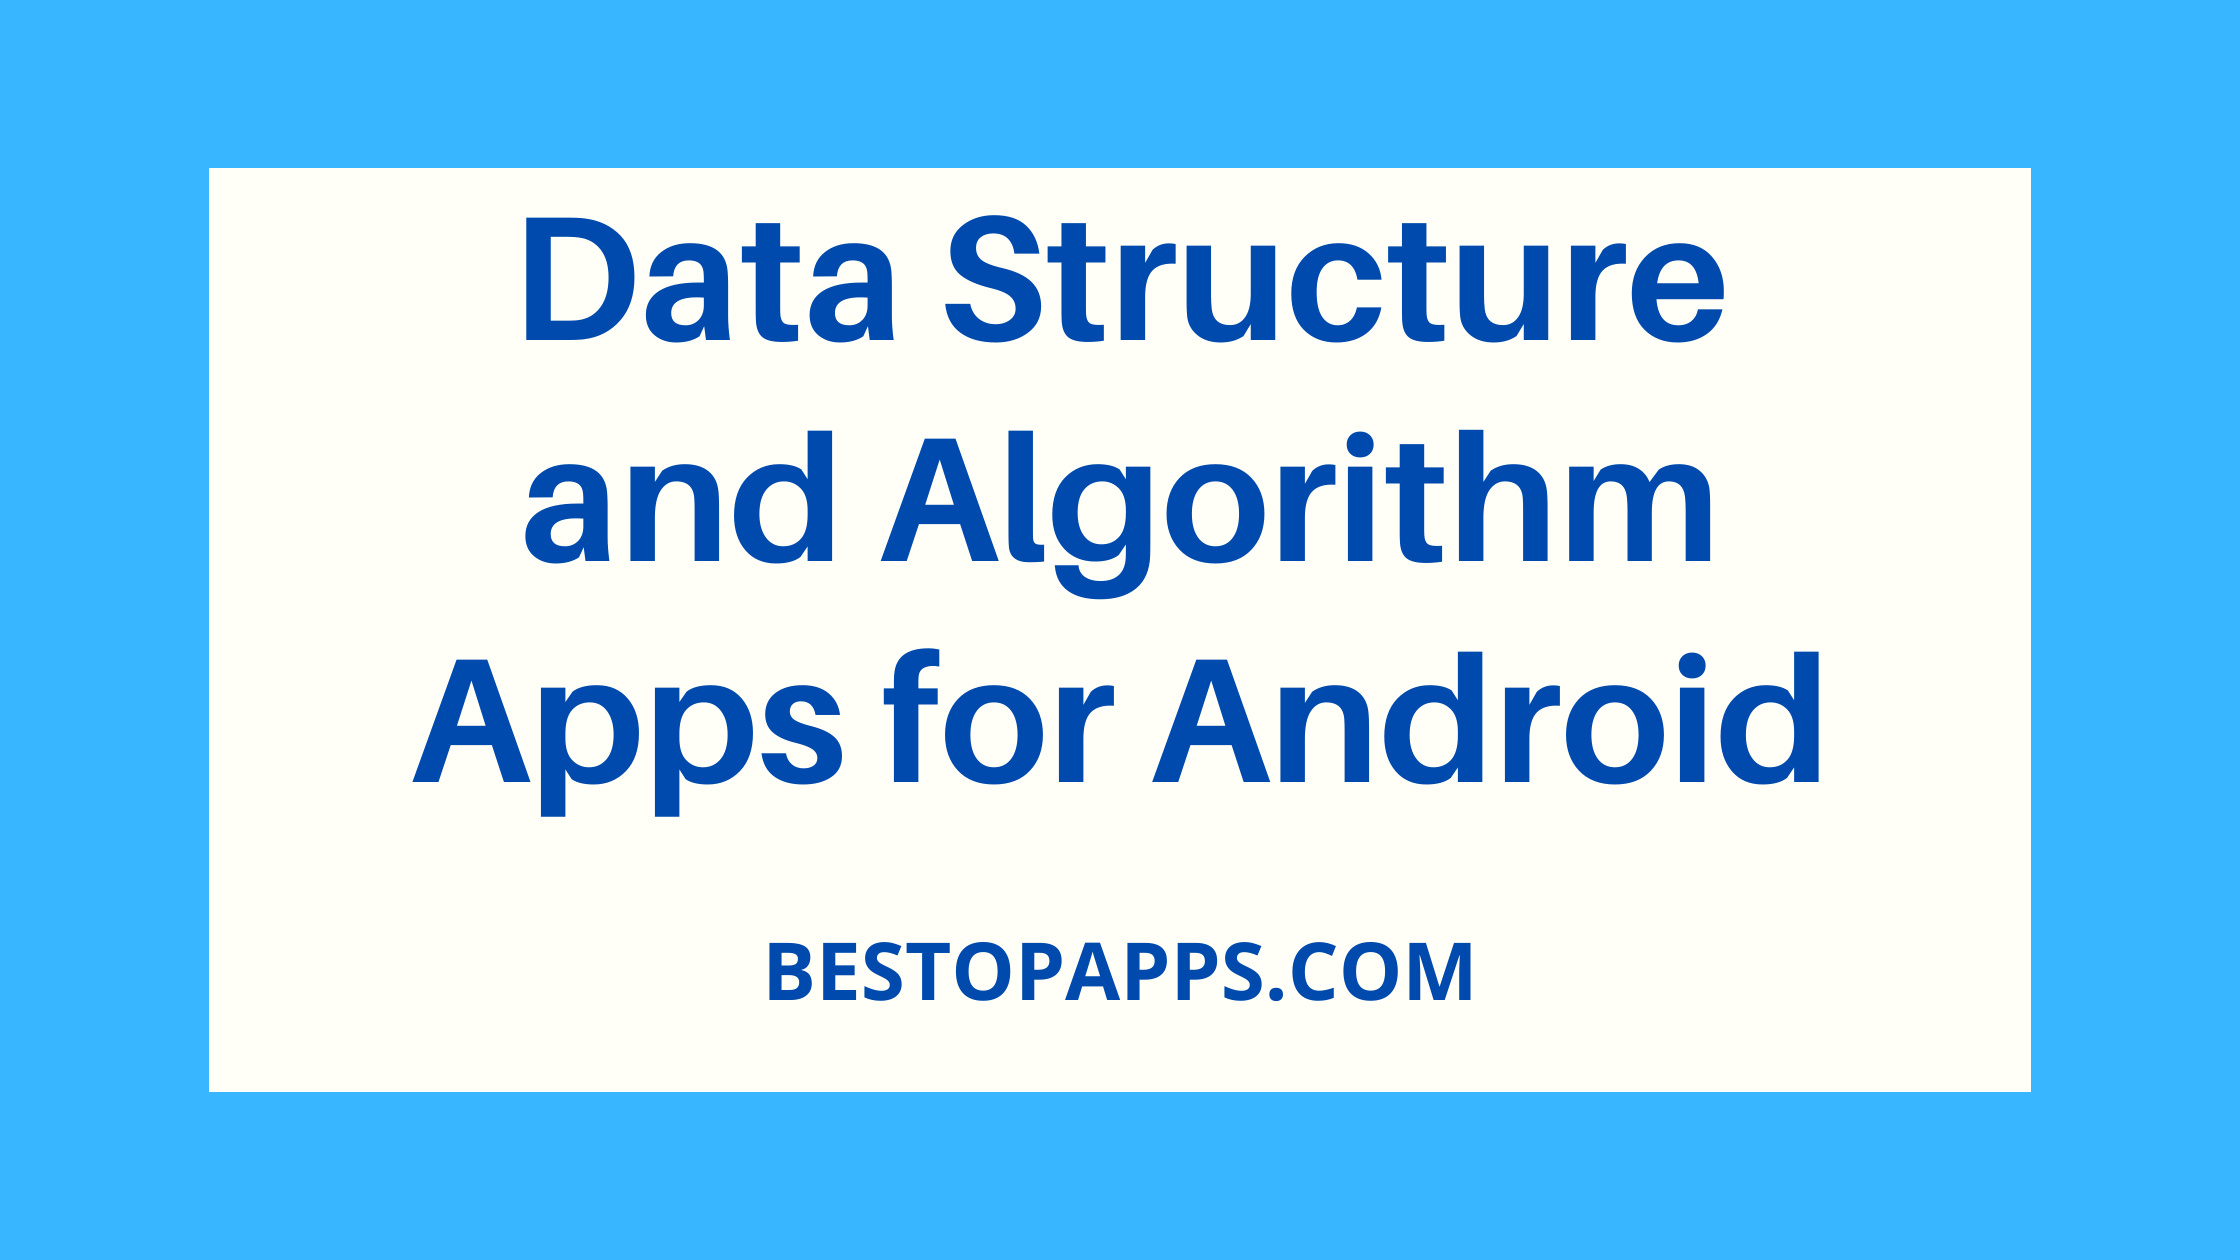 Data Structure and Algorithm Apps for Android